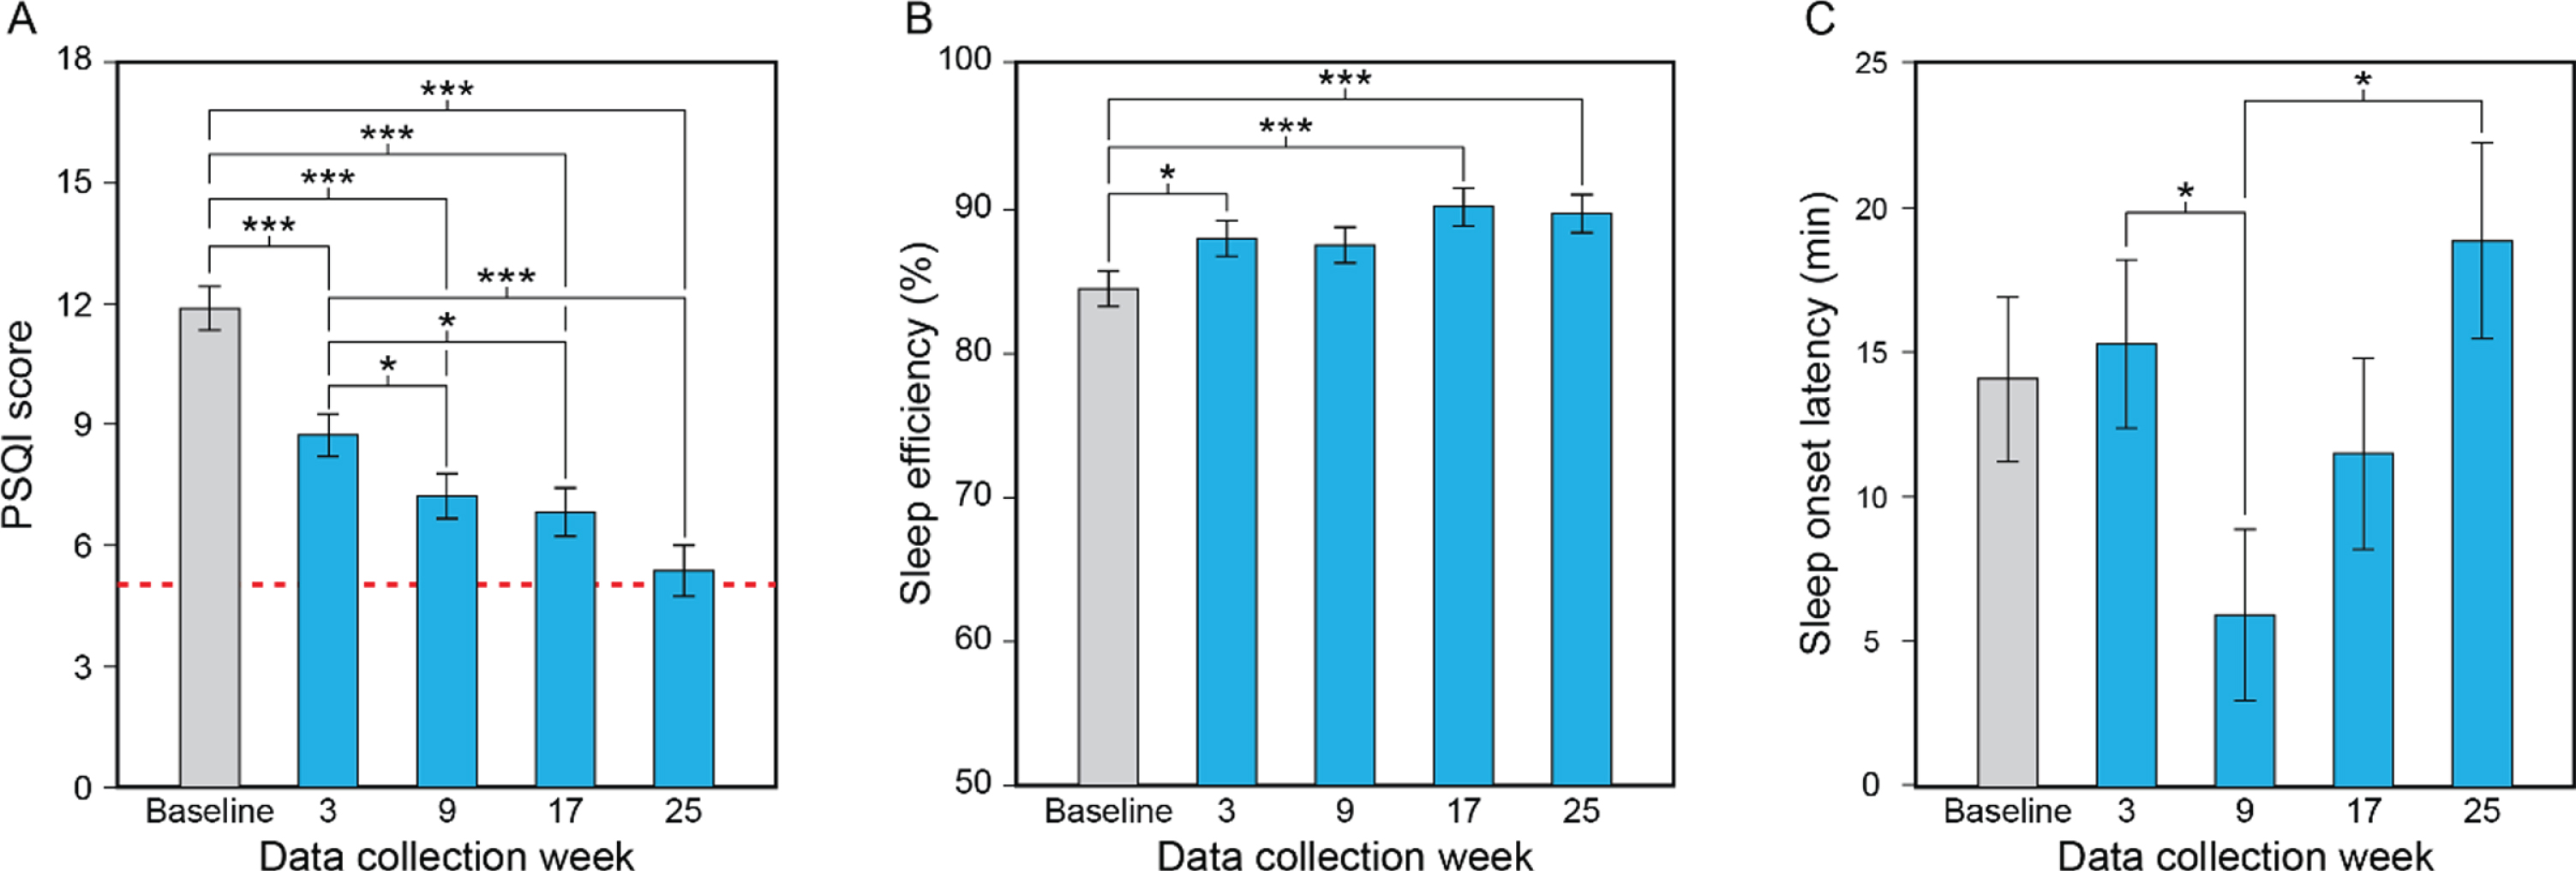 Results for the study’s primary aim, showing the statistically significant effect of data collection week (A–C). Compared to baseline and the first data collection week of the lighting intervention (week 3), participants’ mean PSQI scores decreased (i.e., improved) significantly as the lighting intervention progressed, falling to close to the threshold for the absence of sleep disturbances (scores < 5, dashed line) by week 25 (A). Compared to baseline, participants’ mean sleep efficiency values increased significantly (i.e., improved) at data collection weeks 3, 17, and 25 (B). Sleep onset latency decreased (i.e., improved) between data collection weeks 3 and 9 but increased between weeks 9 and 25 (C). The values represent estimated means and the error bars indicate SEM. PSQI, Pittsburgh Sleep Quality Index; *p < 0.05; ***p < 0.001.